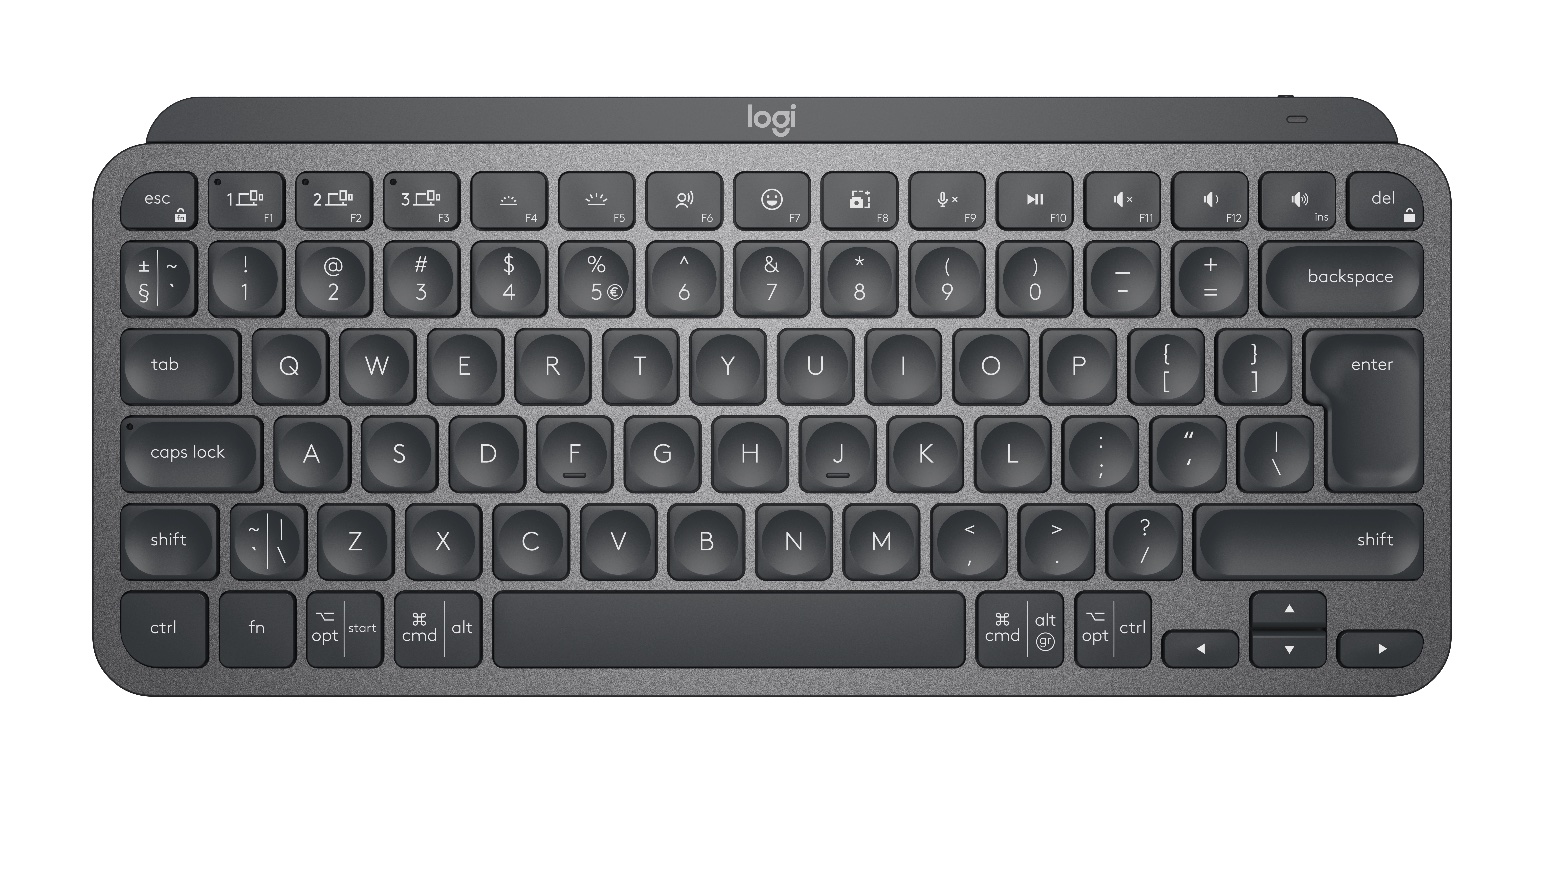 The BEST keyboards to buy in 2022